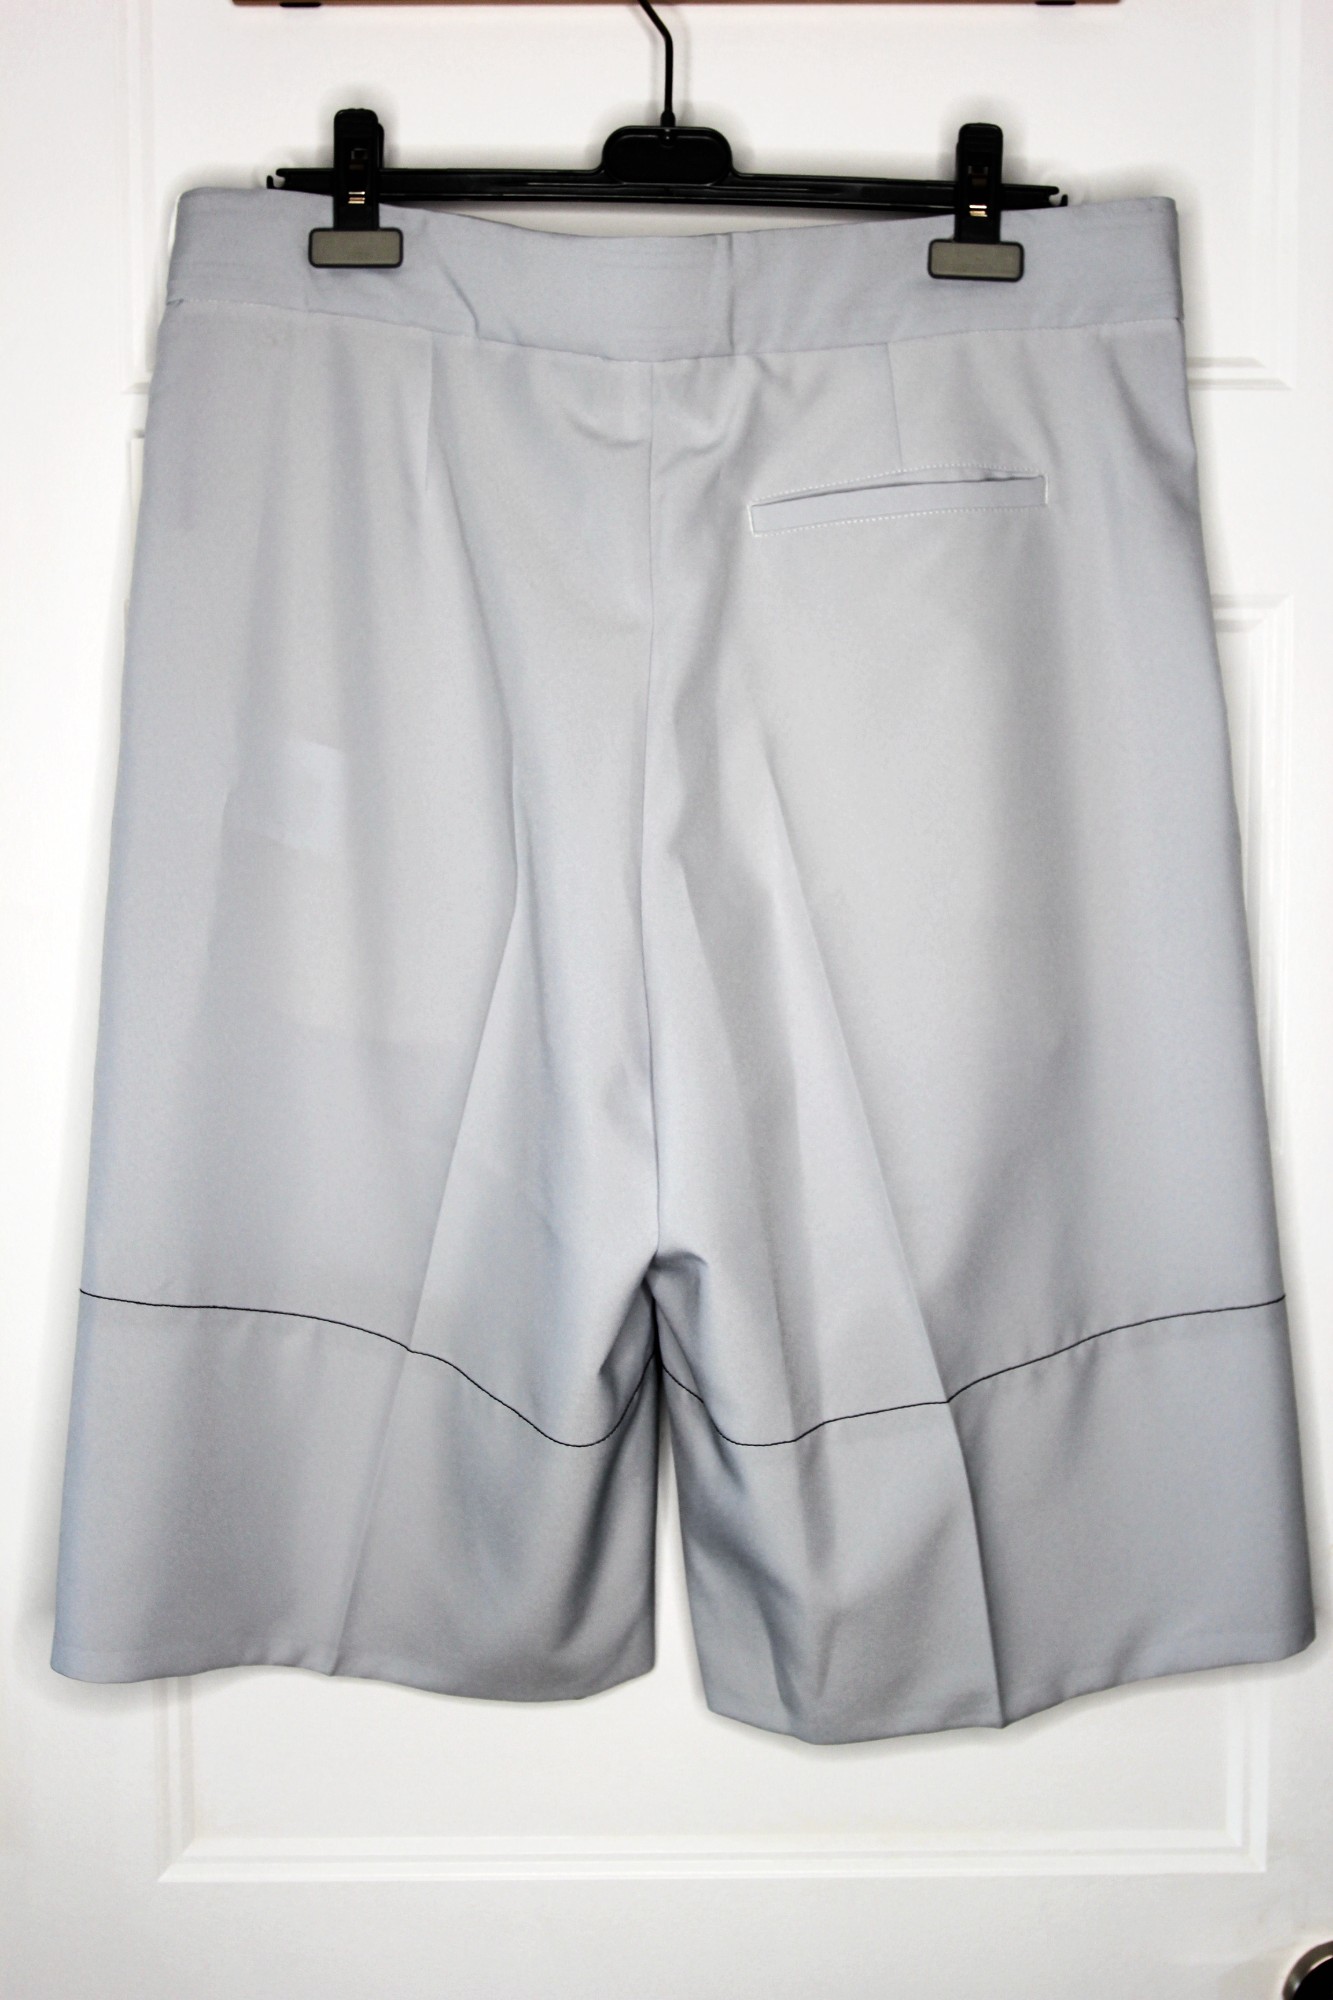 BNWT SS23 OAMC ACCENT STITCHING LONG BELTED SHORTS L - 3